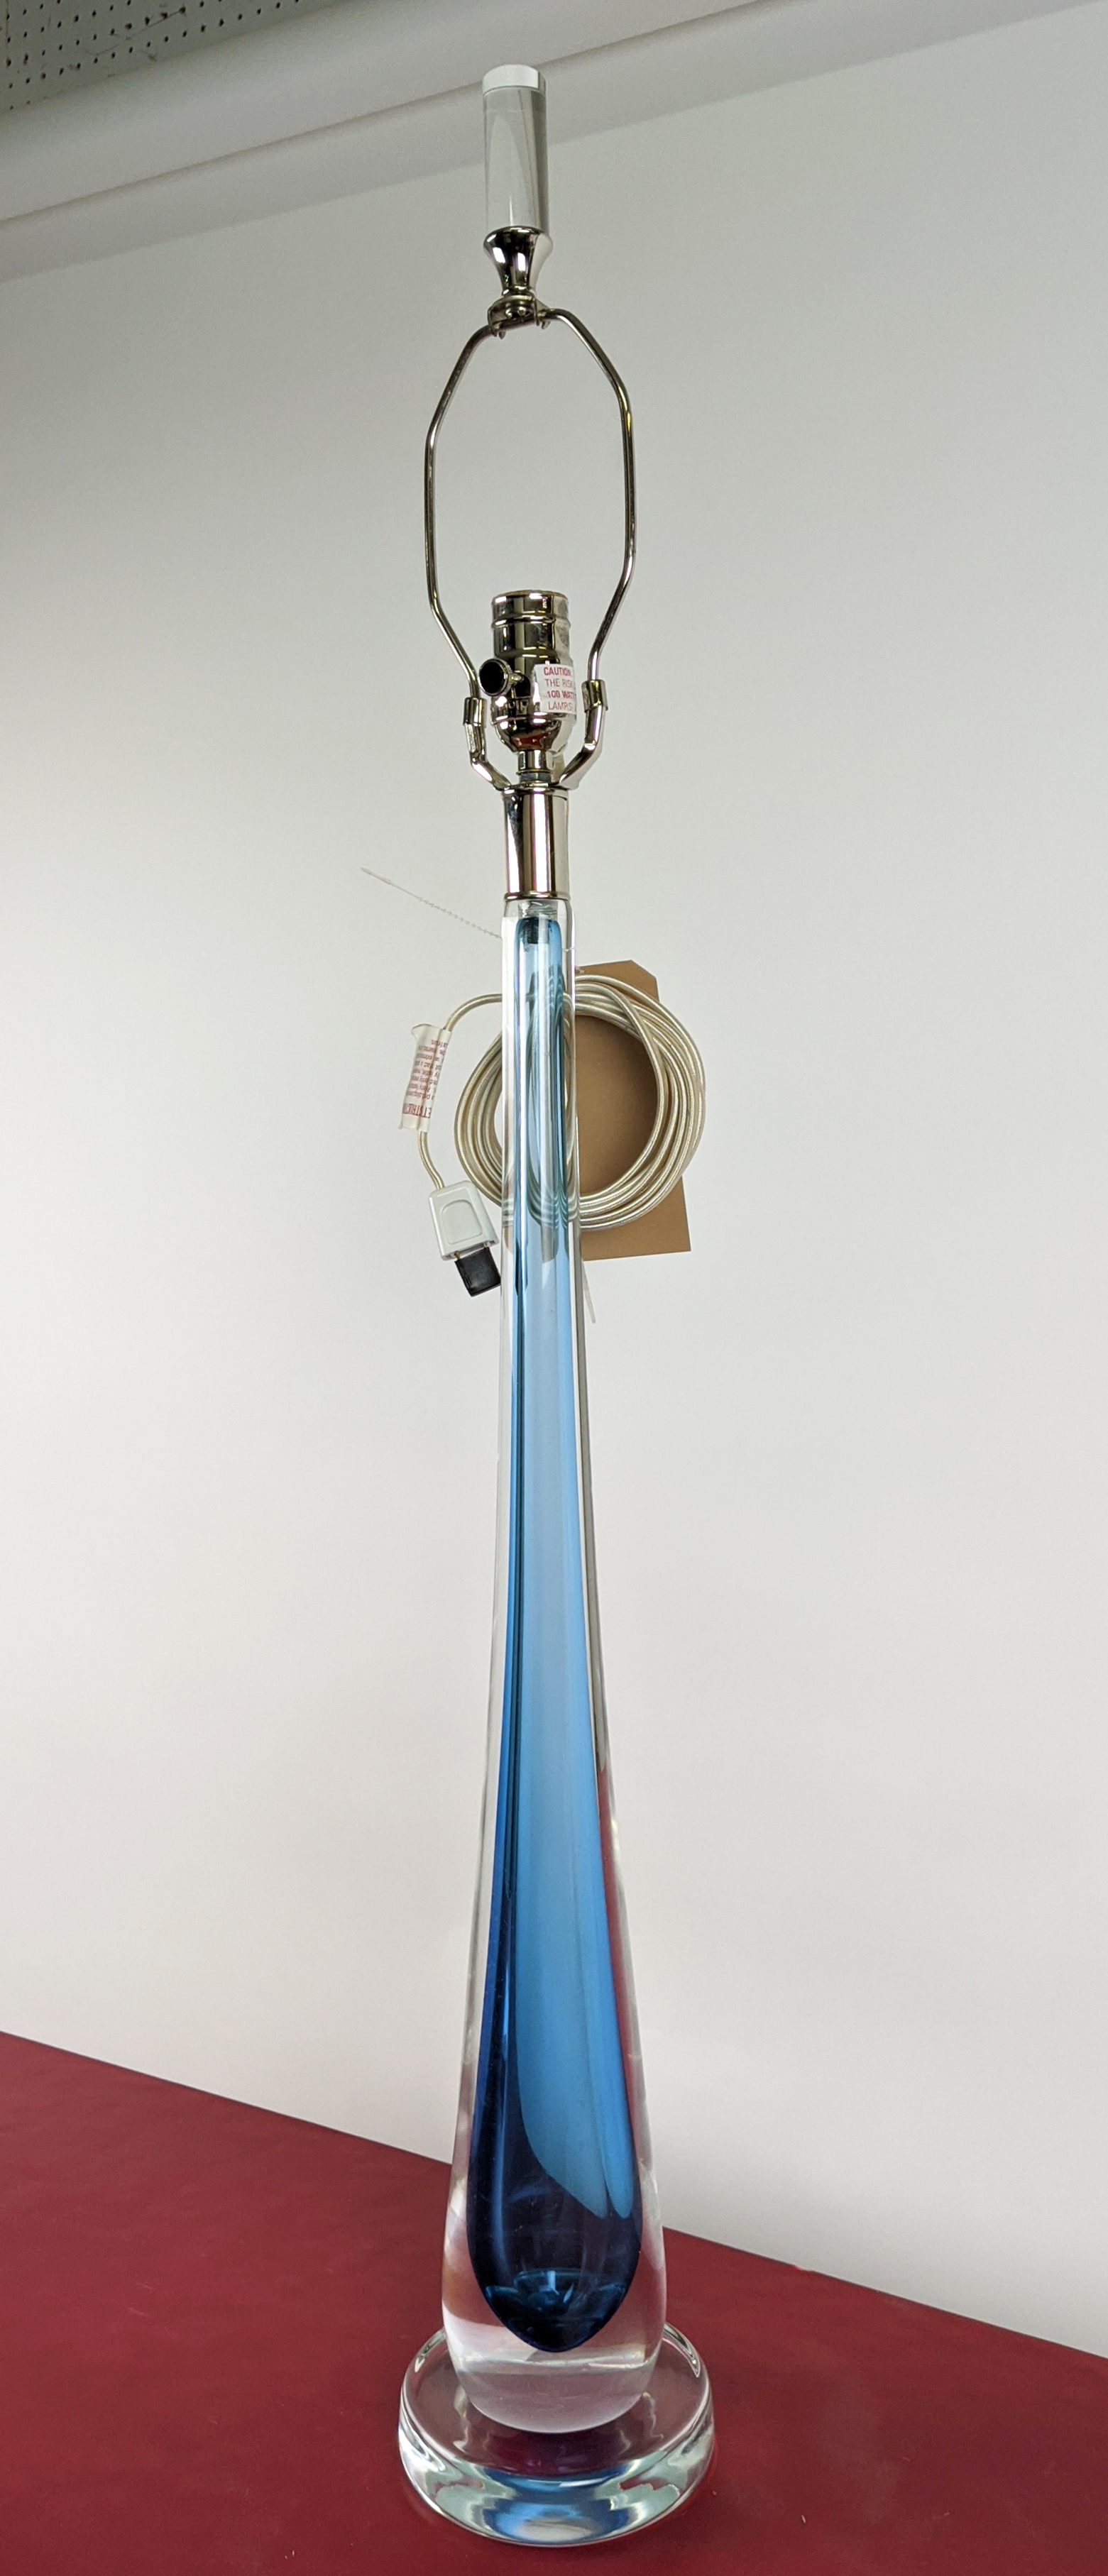 STUDIO A HOME TABLE LAMP, slender blue glass design with shade carrier, 100cm H. - Image 5 of 17